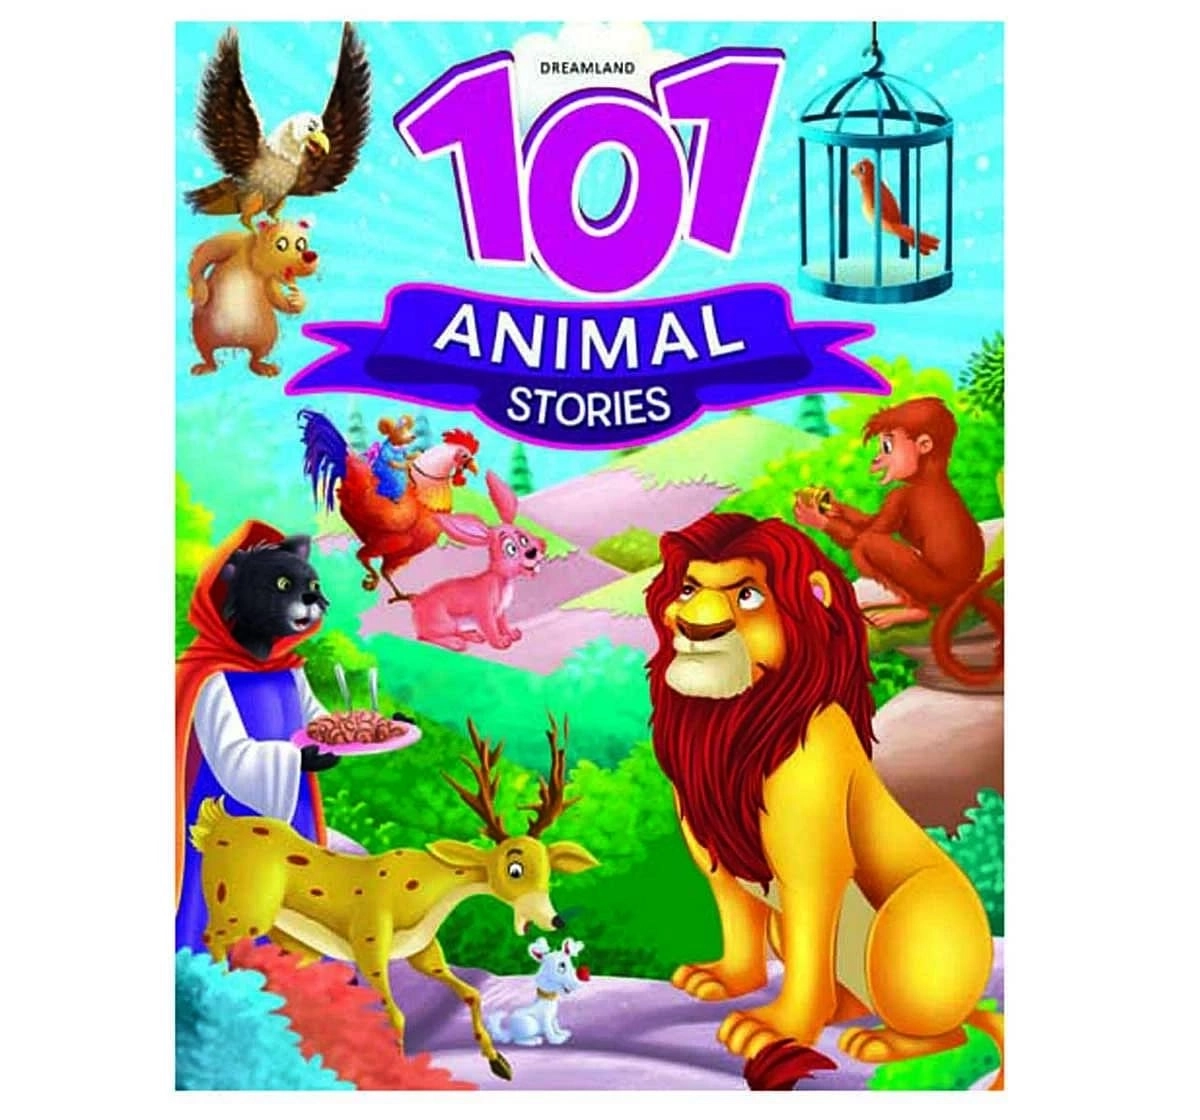 Dreamland Paper Back 101 Animals Stories Books for Kids 5Y+, Multicolour